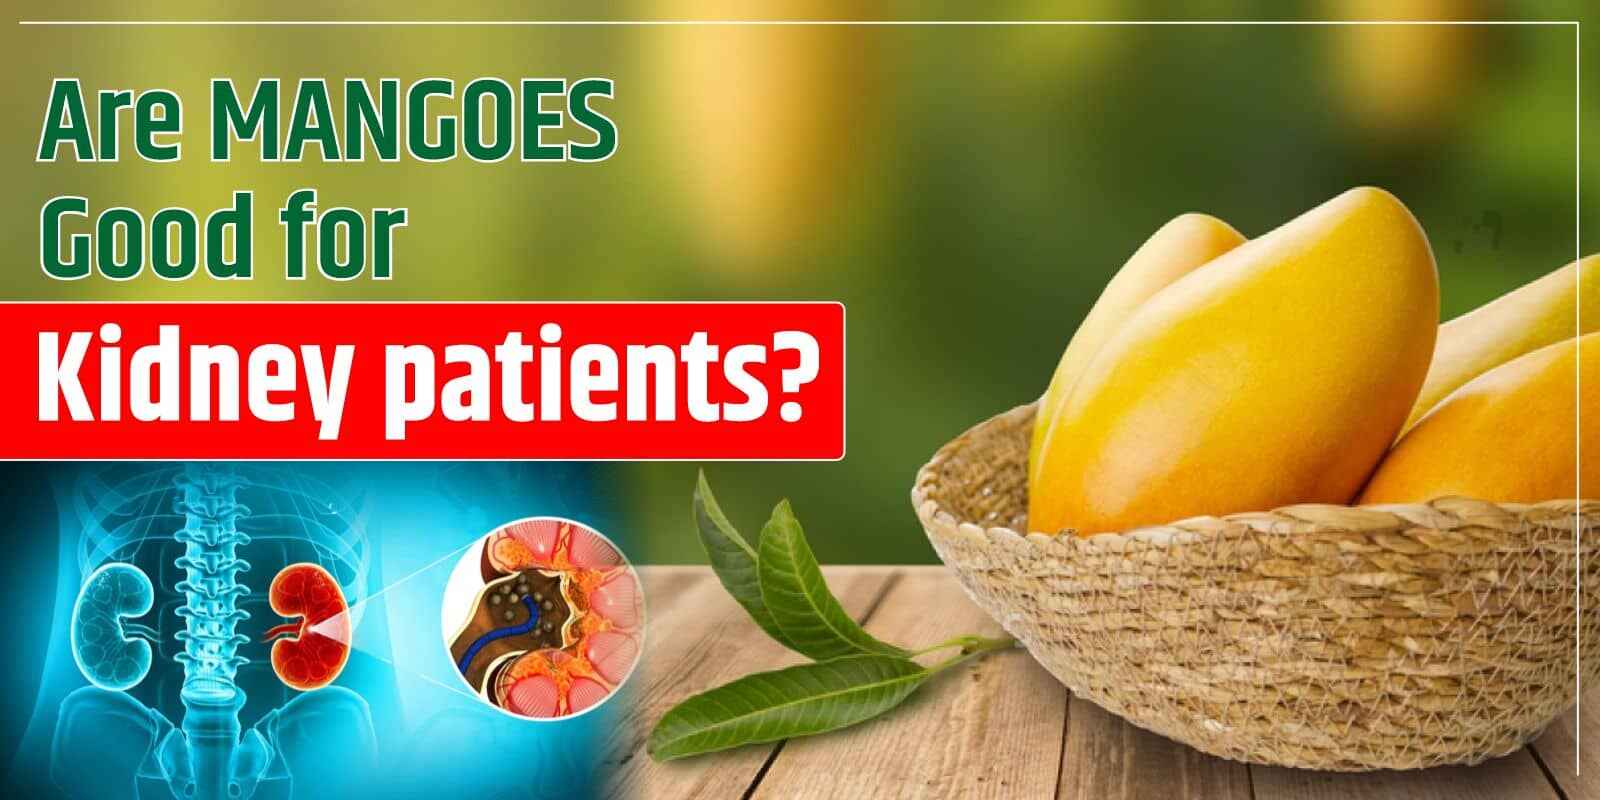 Are Mangoes Good for Kidney patients?